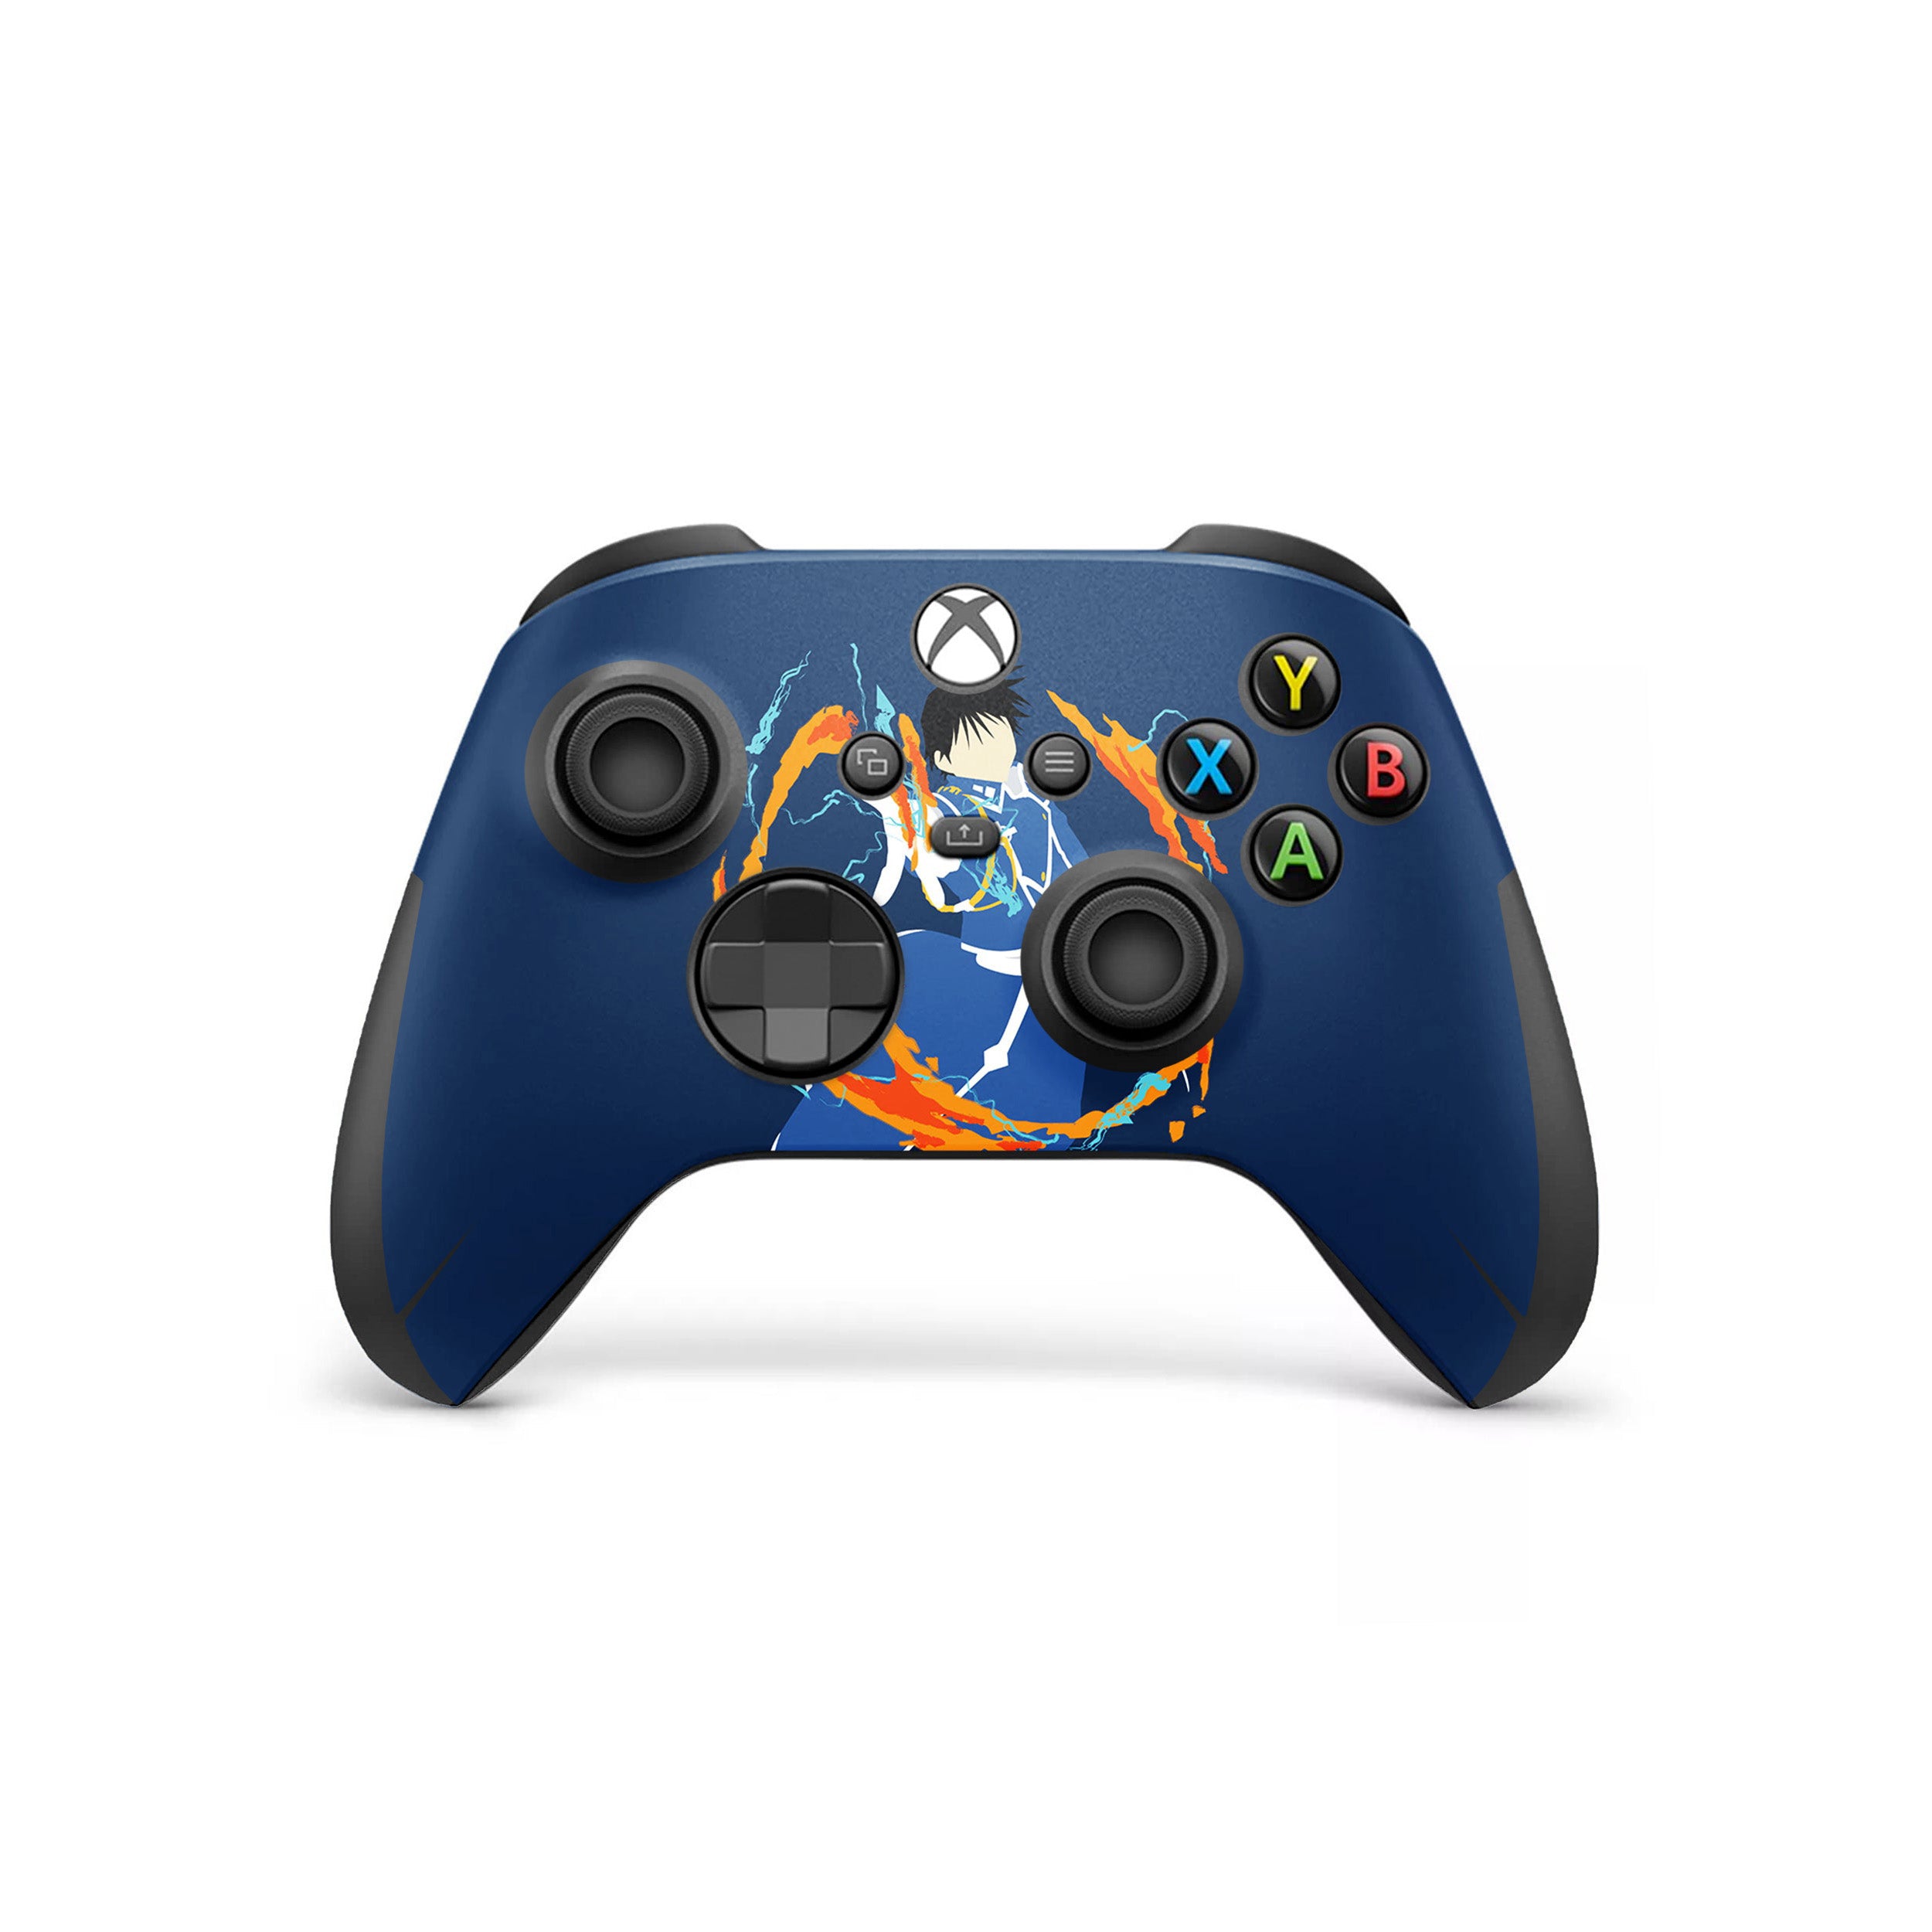 A video game skin featuring a Fullmetal Alchemist Roy Mustang design for the Xbox Wireless Controller.